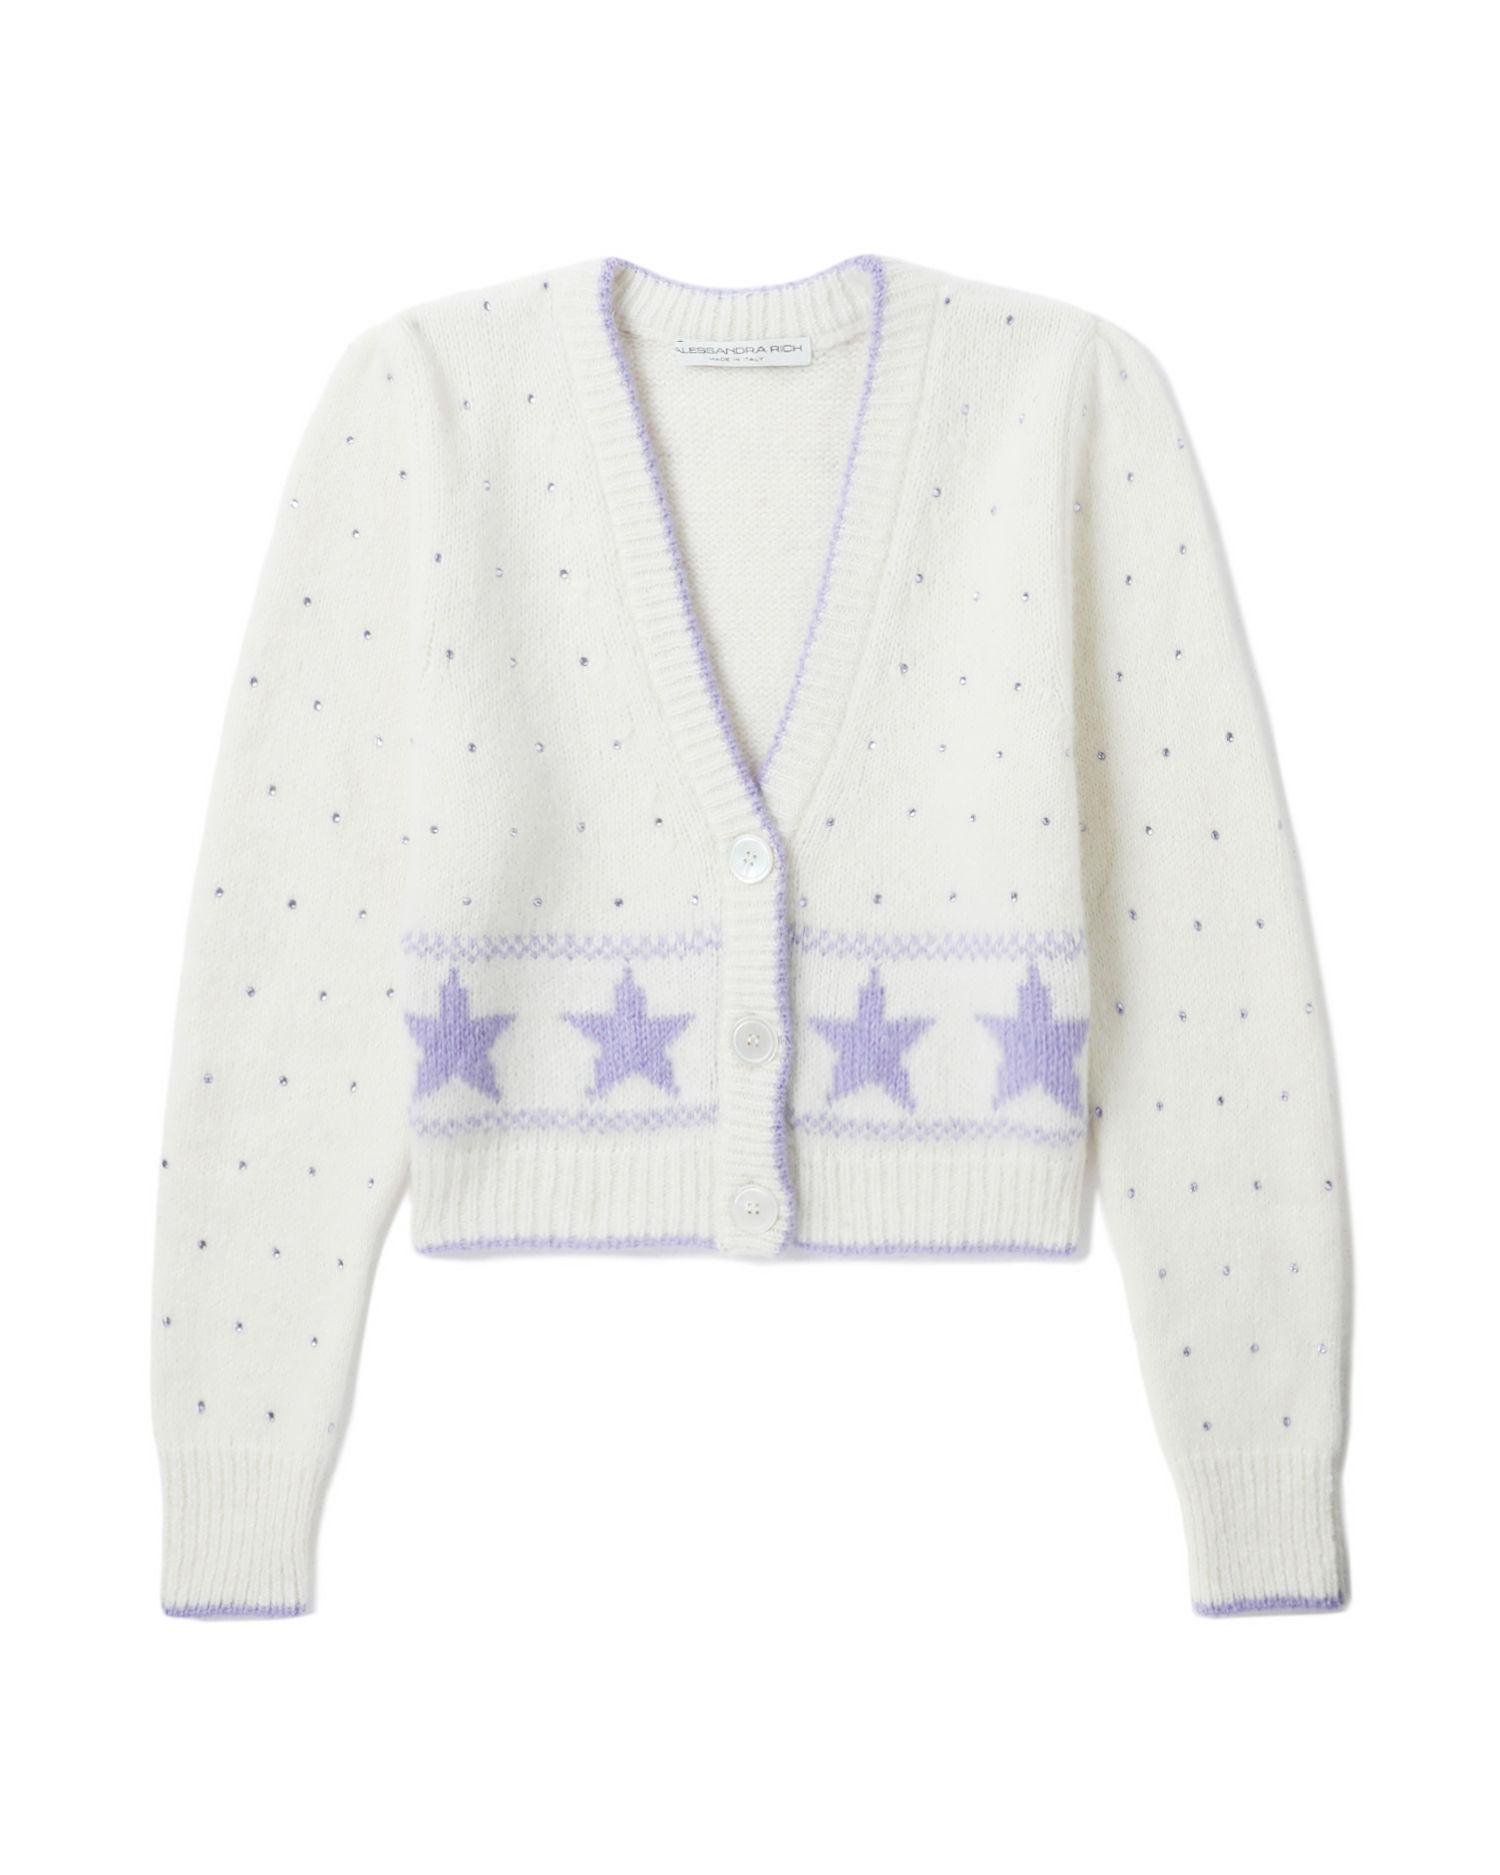 Star jacquard cropped cardigan by ALESSANDRA RICH